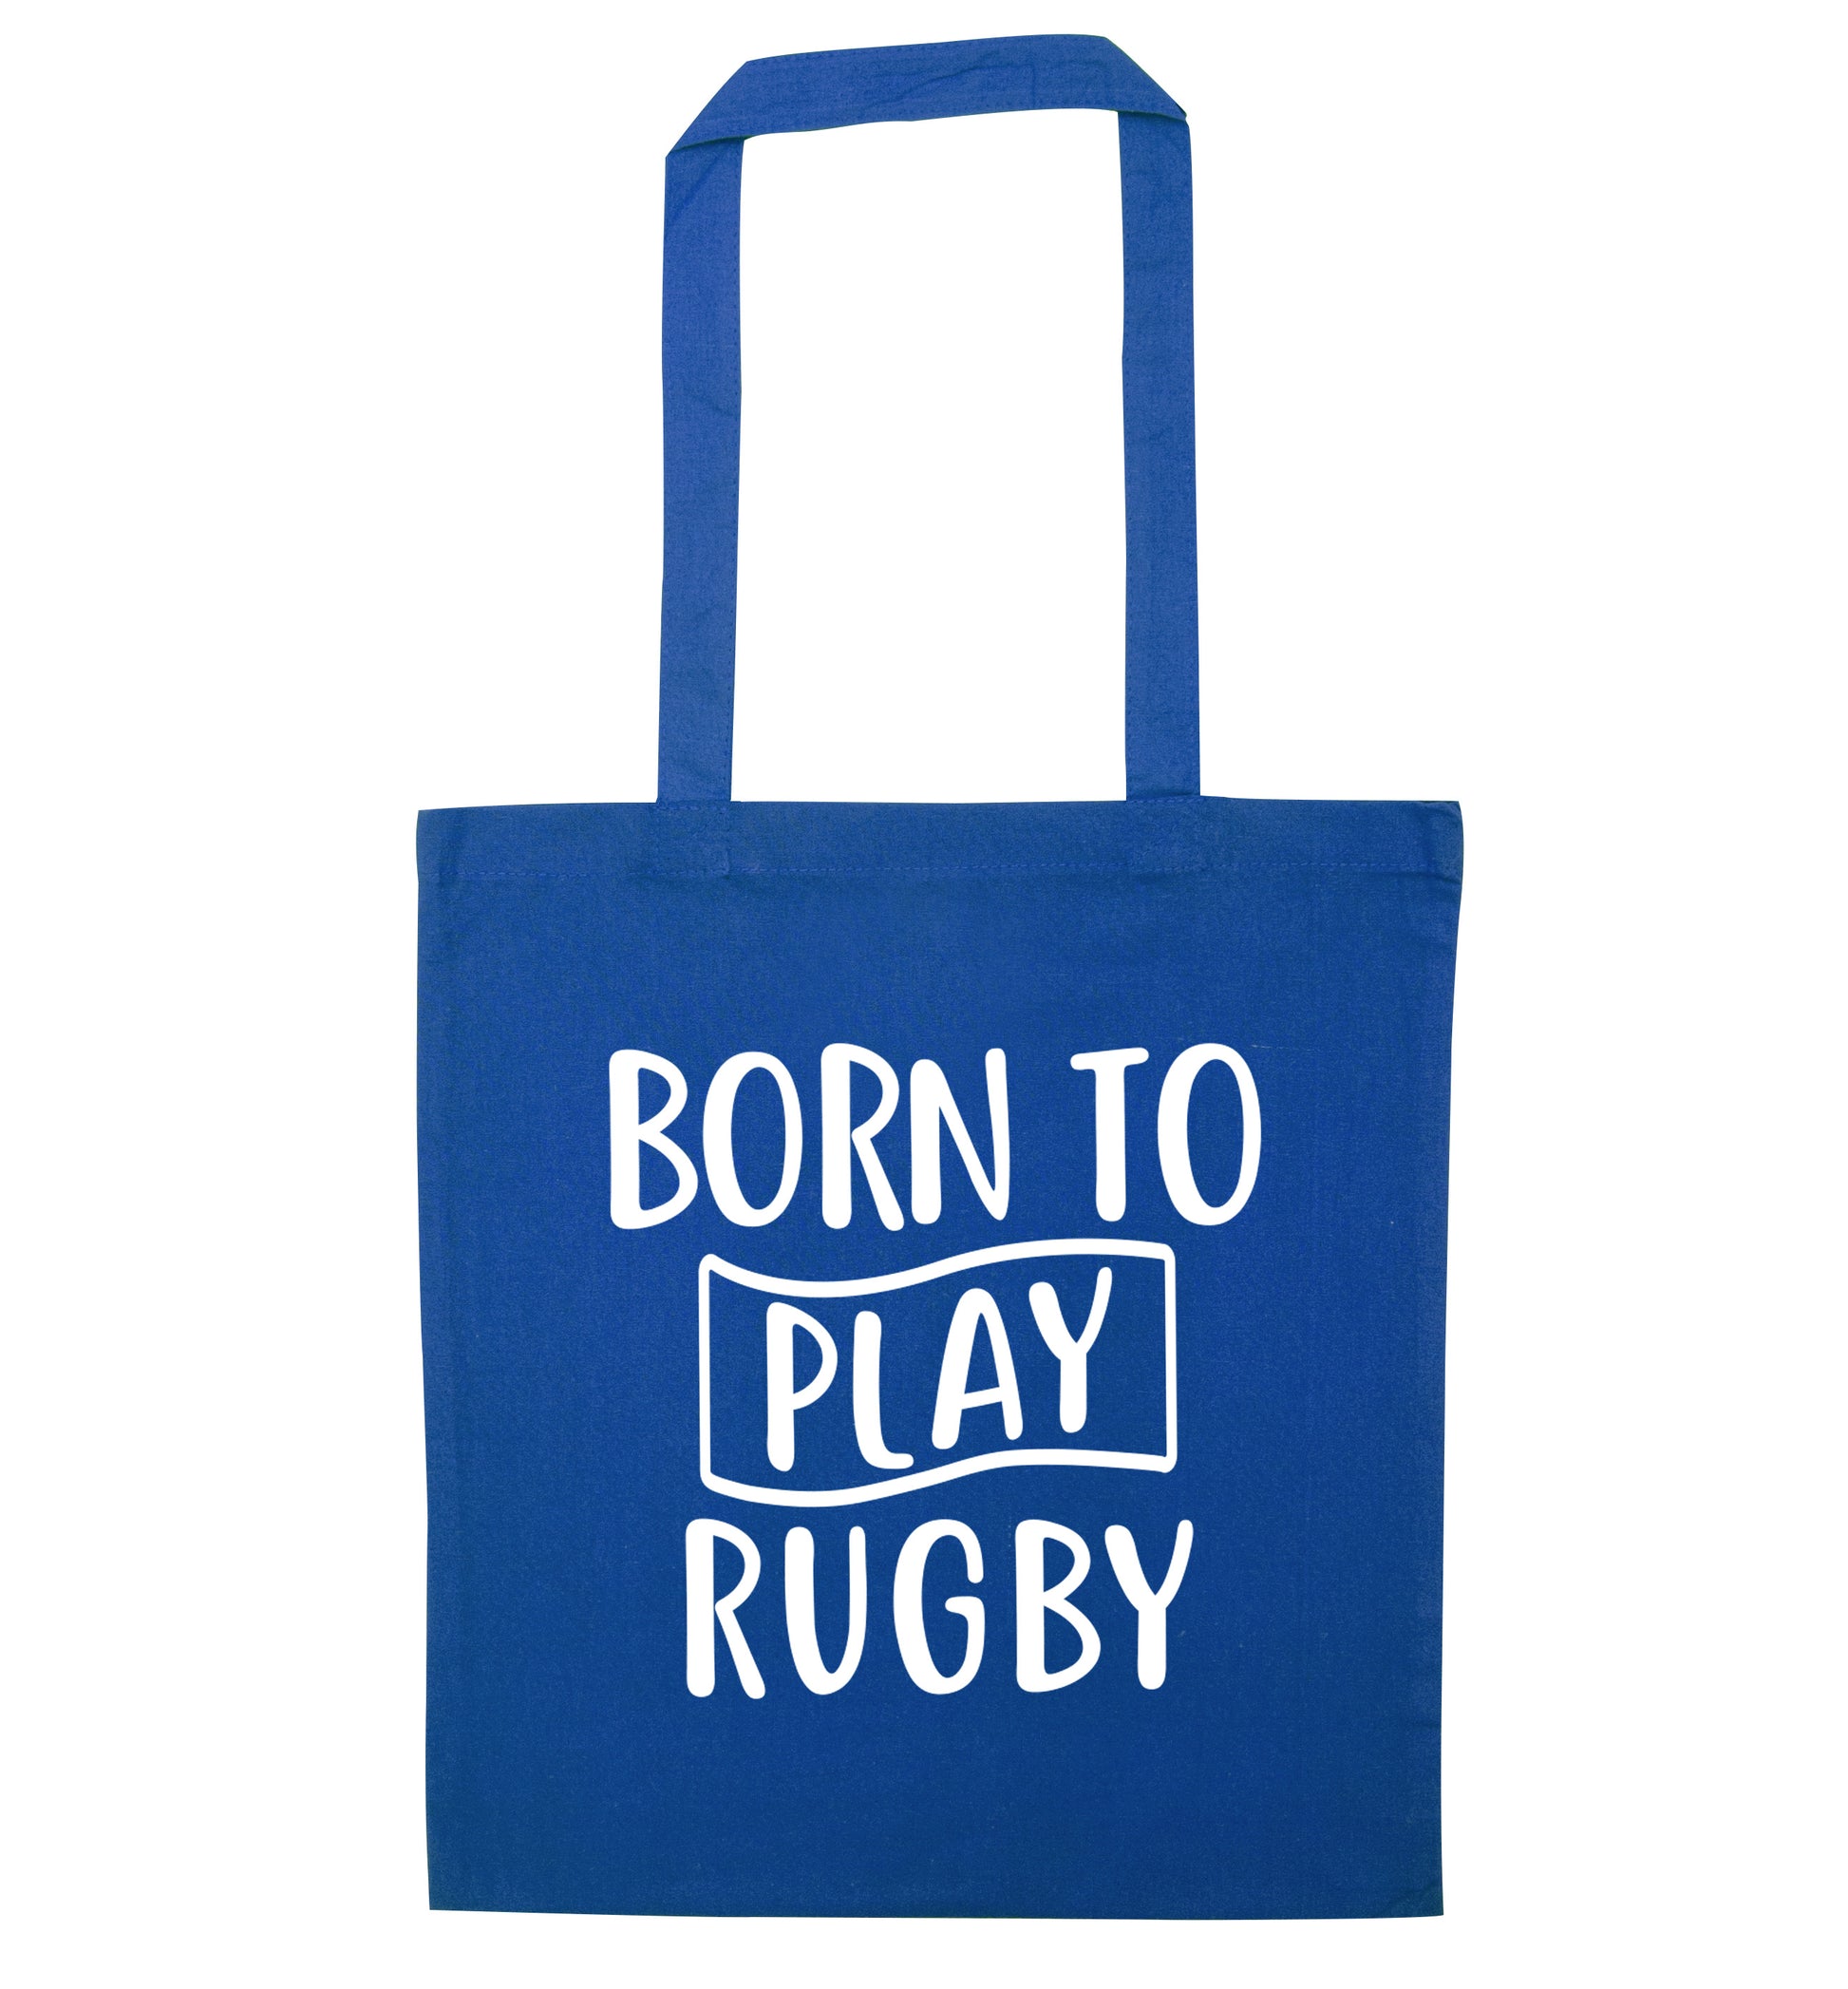 Born to play rugby blue tote bag